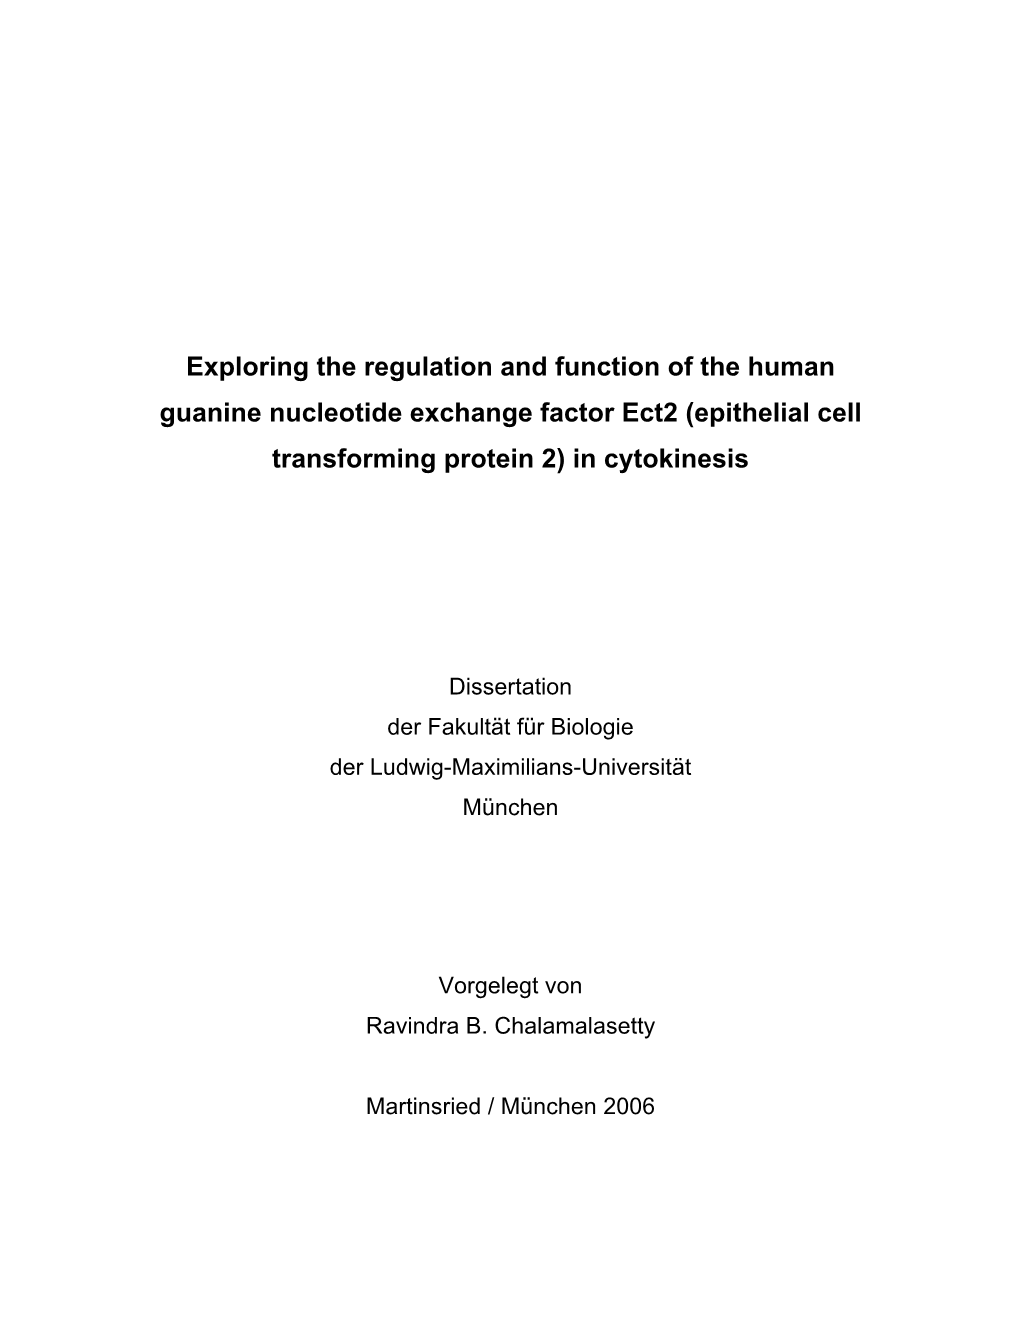 Exploring the Regulation and Function of the Human Guanine Nucleotide Exchange Factor Ect2 (Epithelial Cell Transforming Protein 2) in Cytokinesis